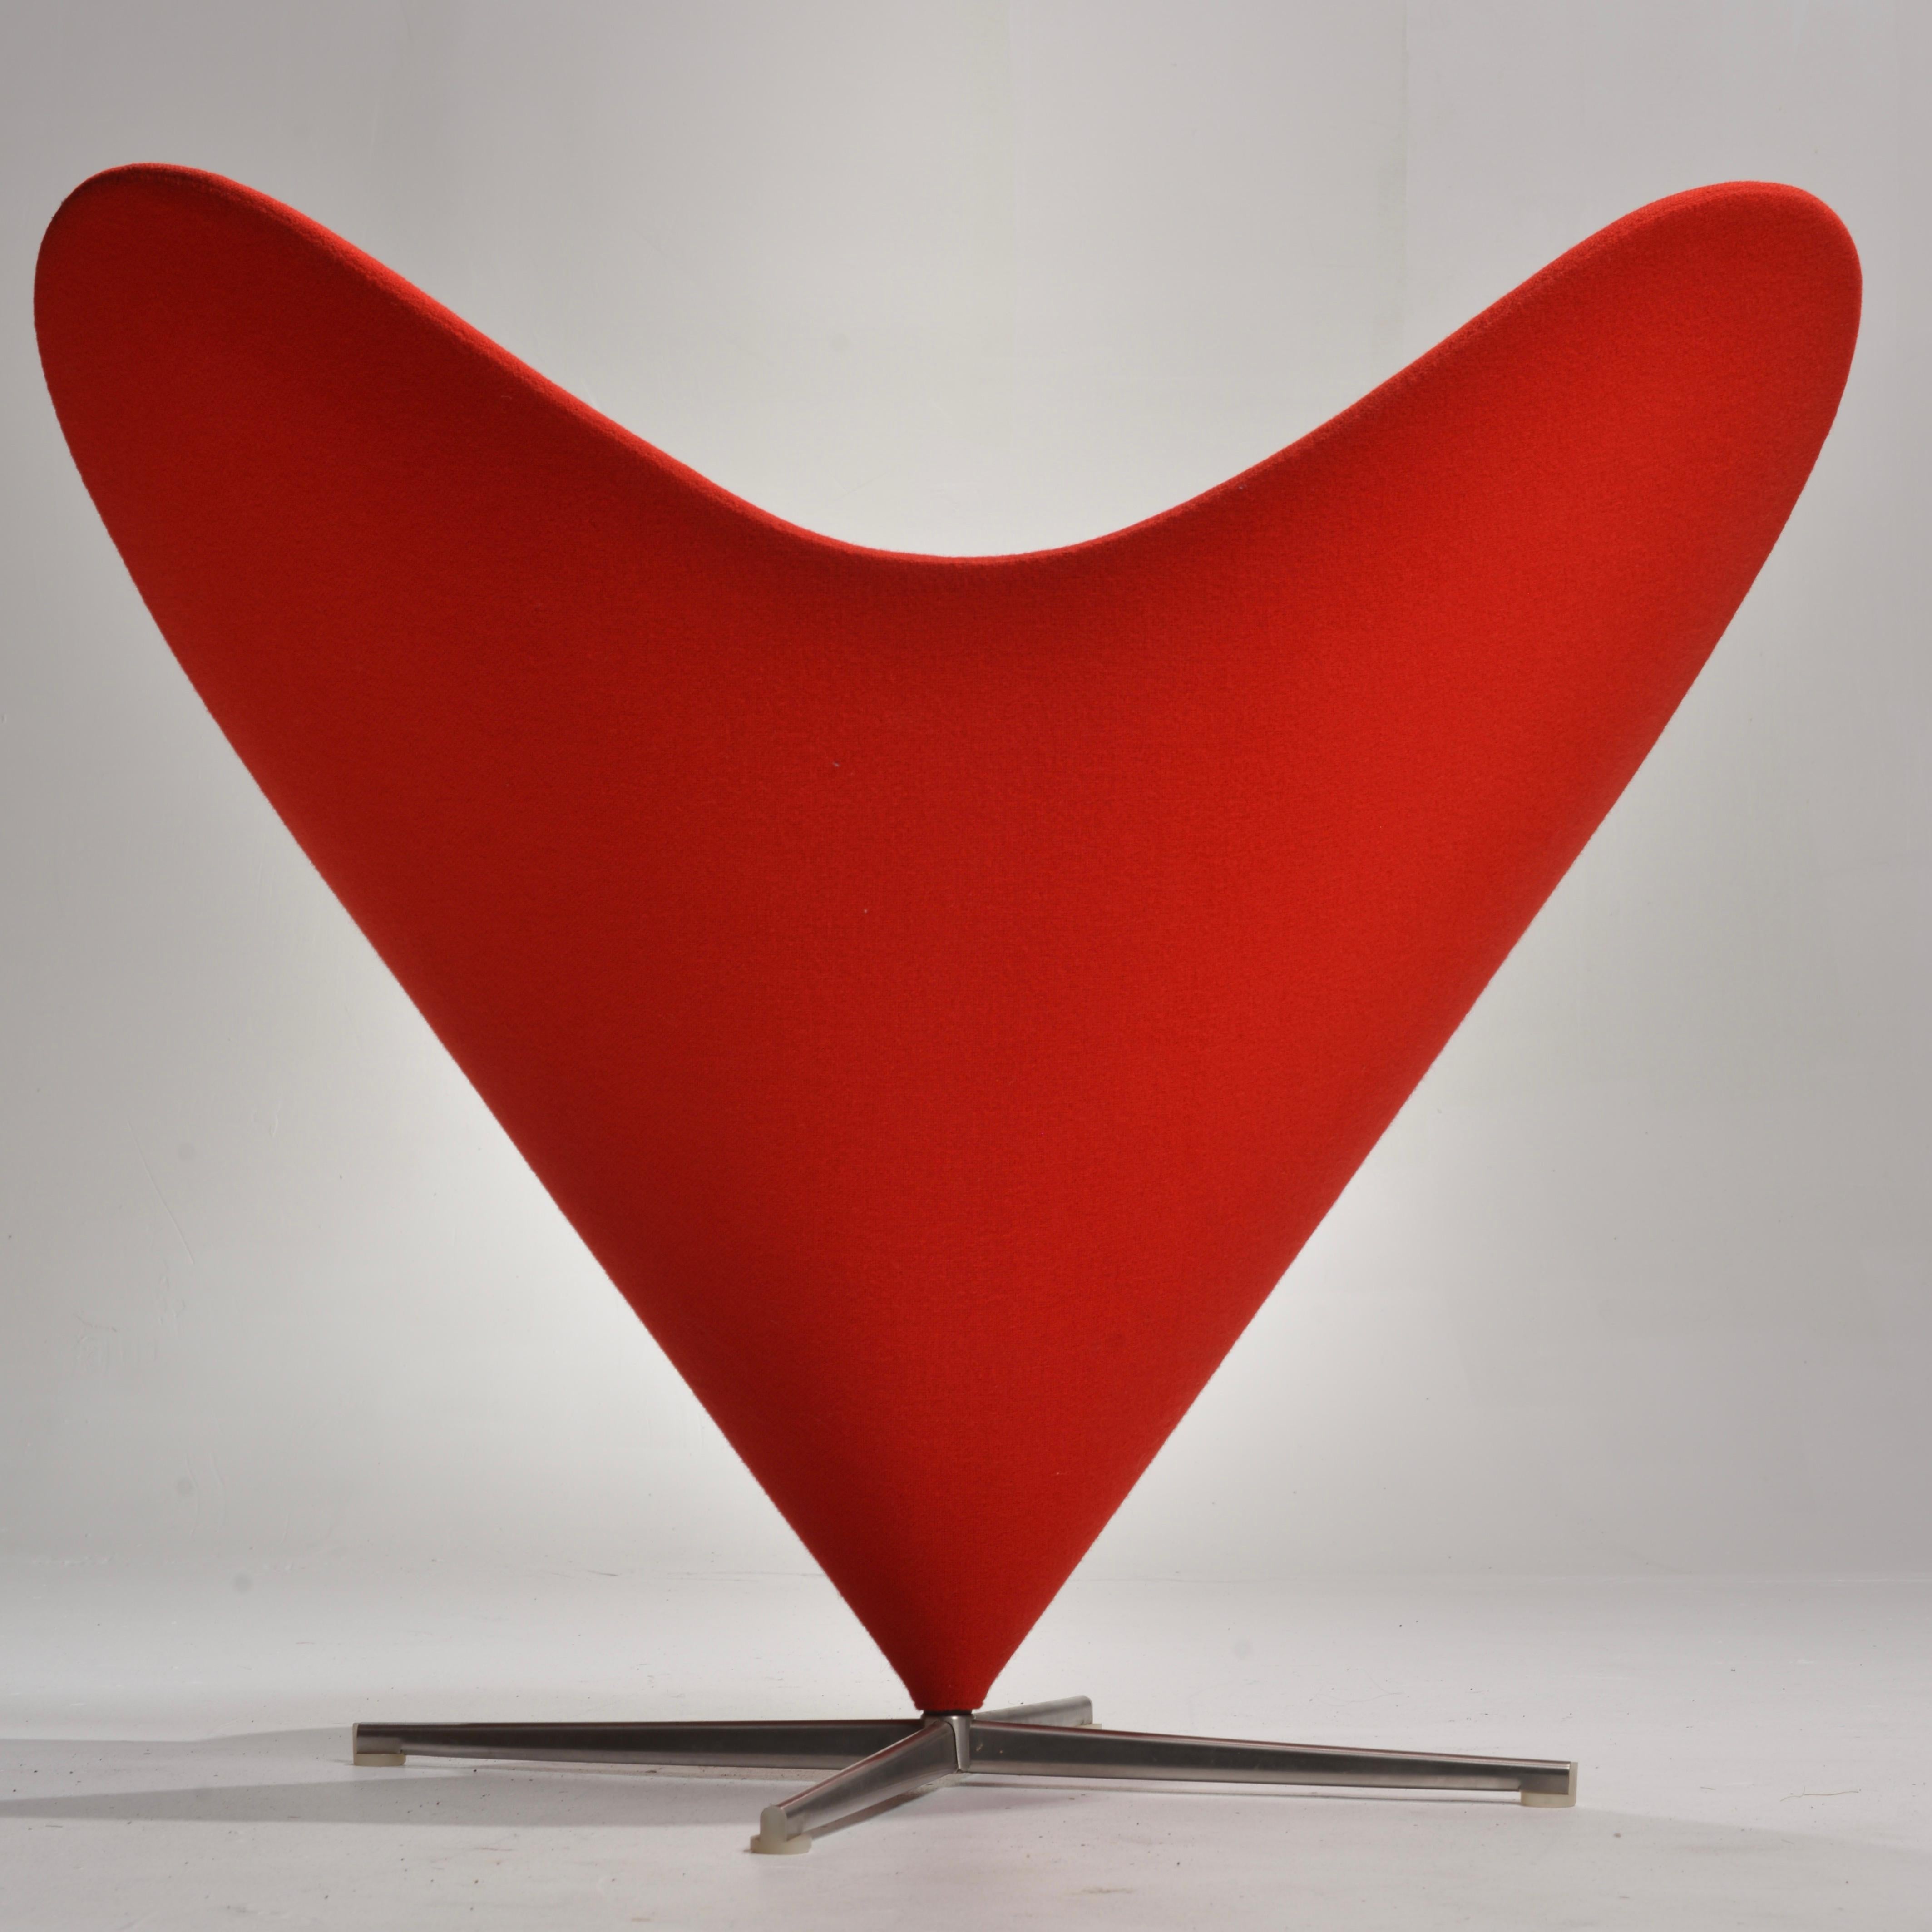 This classic and distinctive red heart cone chair was designed by Verner Panton in 1958. Verner Panton was an influential designer during the 1960's and 70's. His masterful use of color was one of his trademarks. He had a passion for bright colors